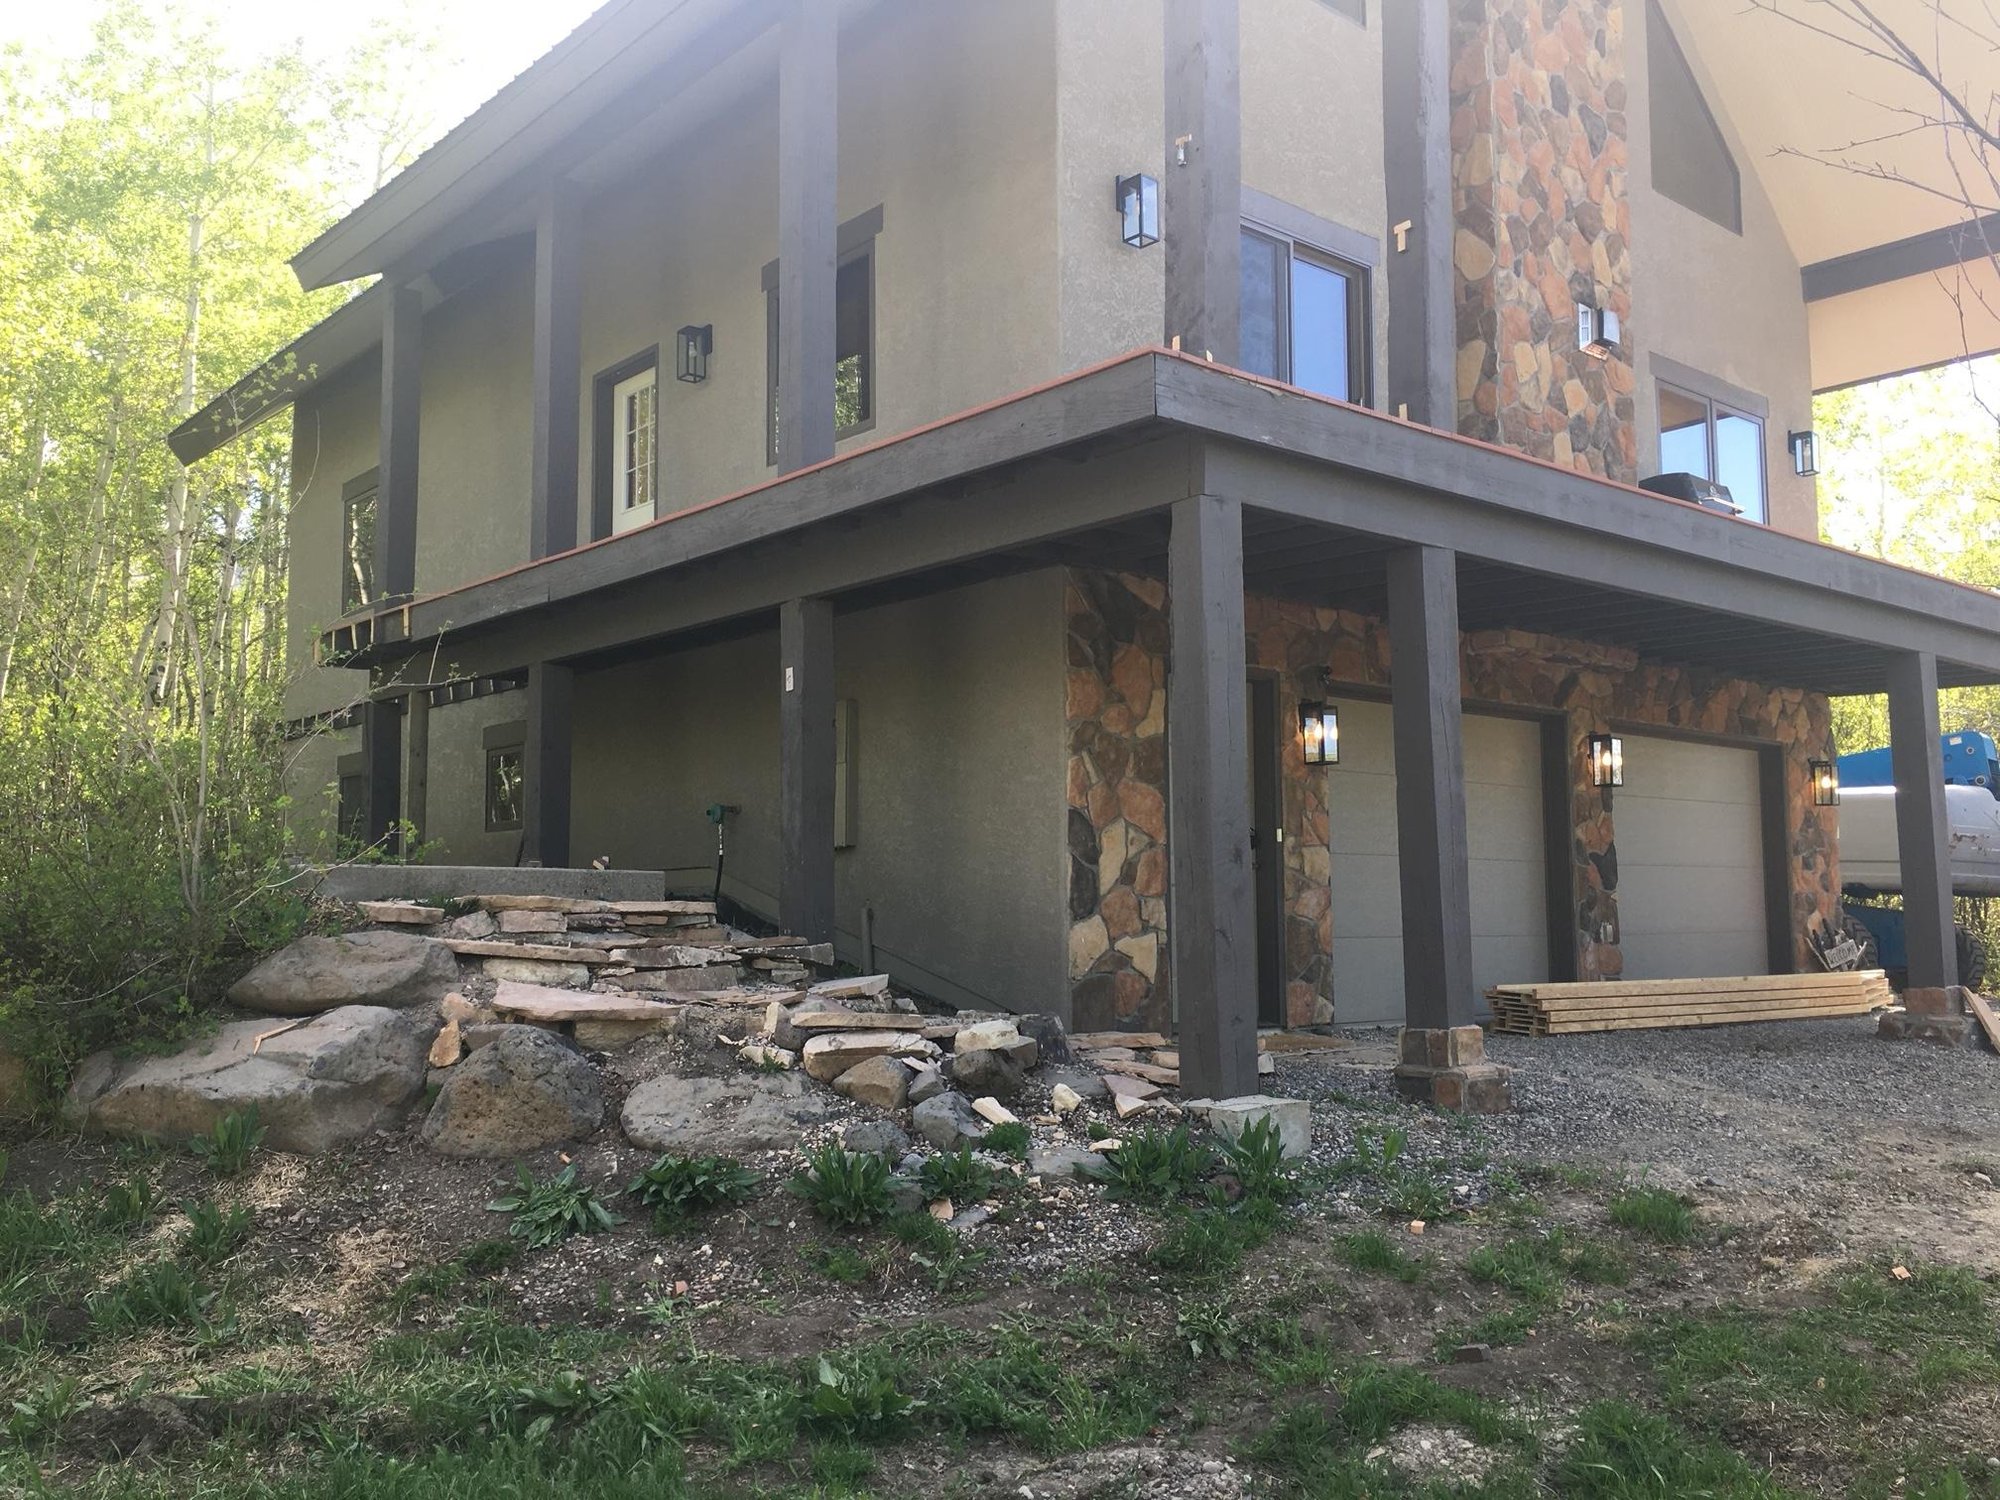 Exterior deck addition on home